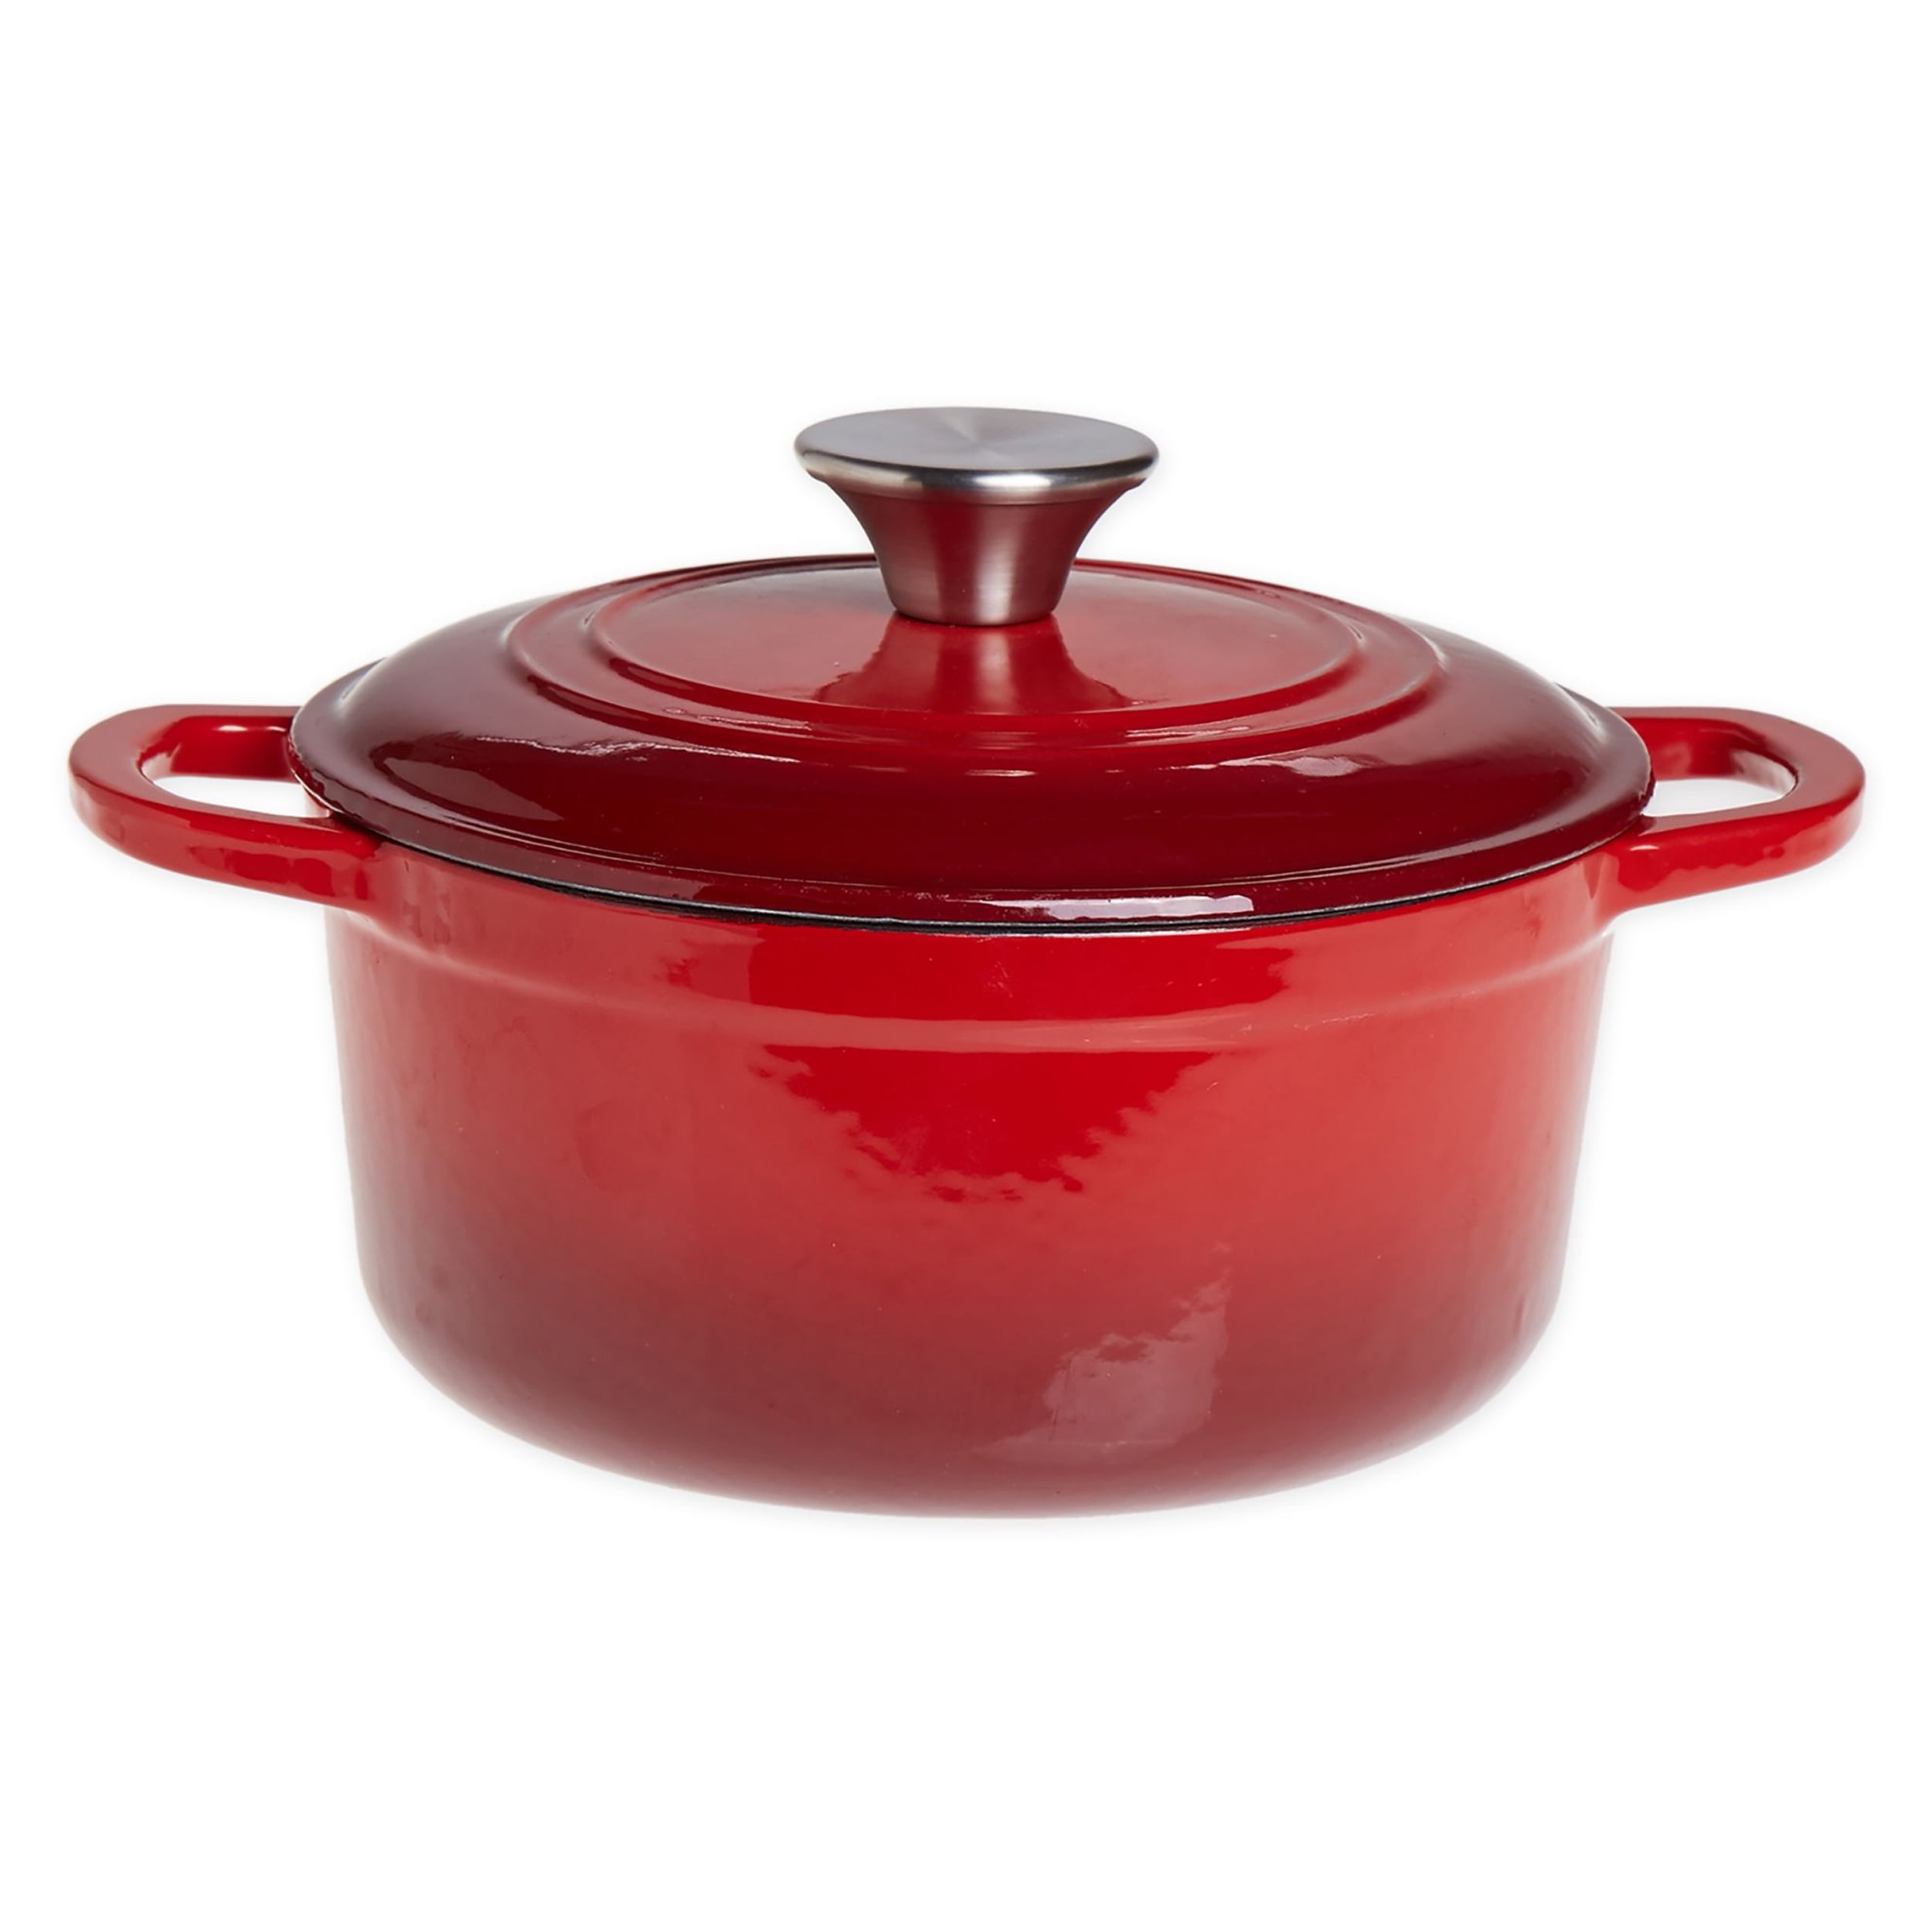 magicplux Dutch Oven Pot with Lid, Enameled Cast Iron Dutch Oven 2 Quart,  Cast Iron Pot for Cooking, Red…